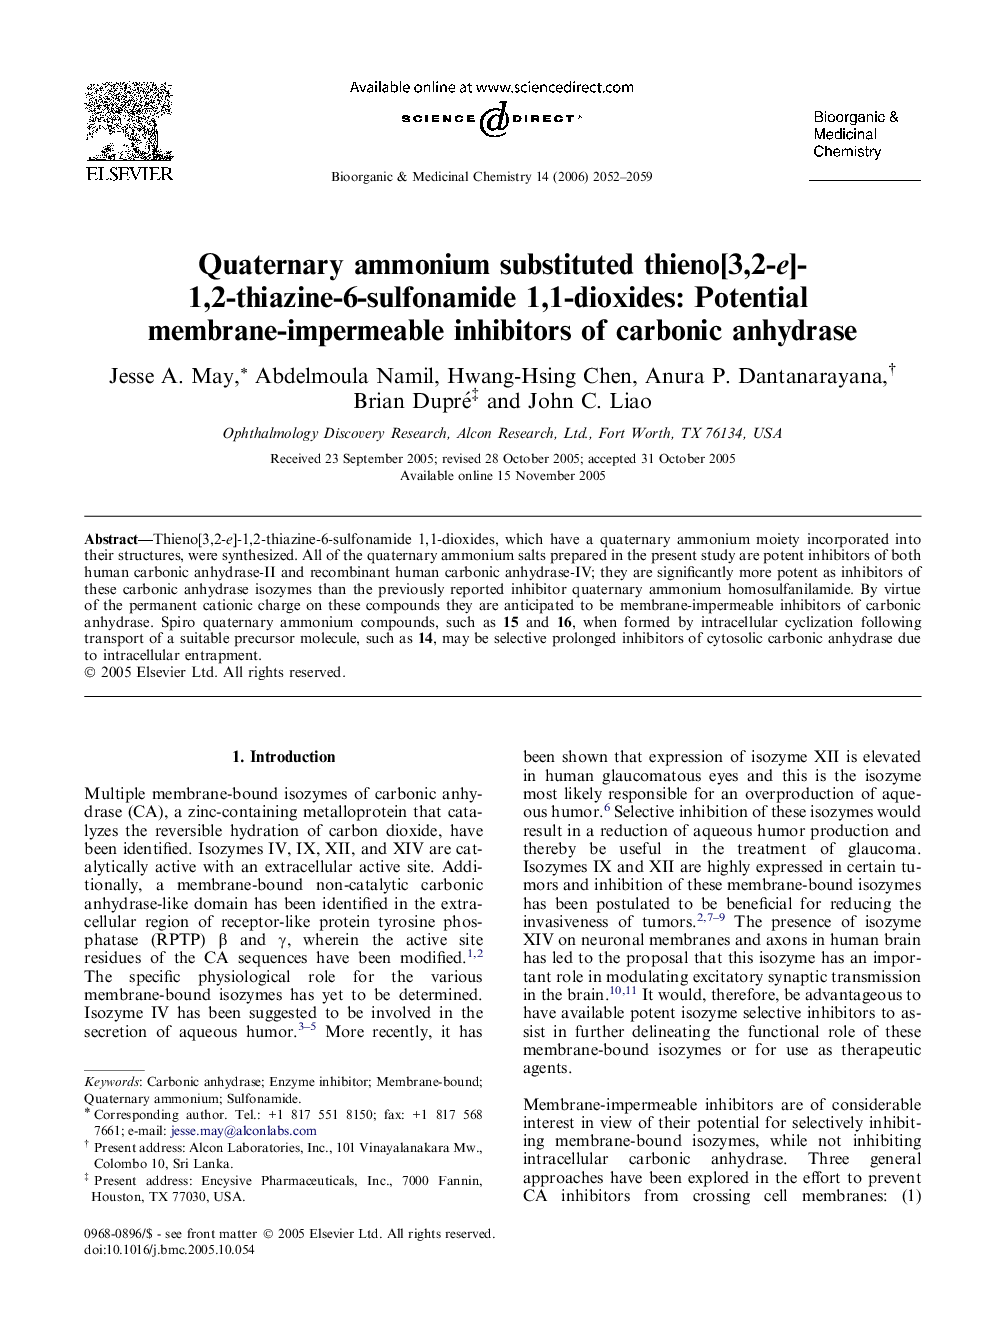 Quaternary ammonium substituted thieno[3,2-e]-1,2-thiazine-6-sulfonamide 1,1-dioxides: Potential membrane-impermeable inhibitors of carbonic anhydrase